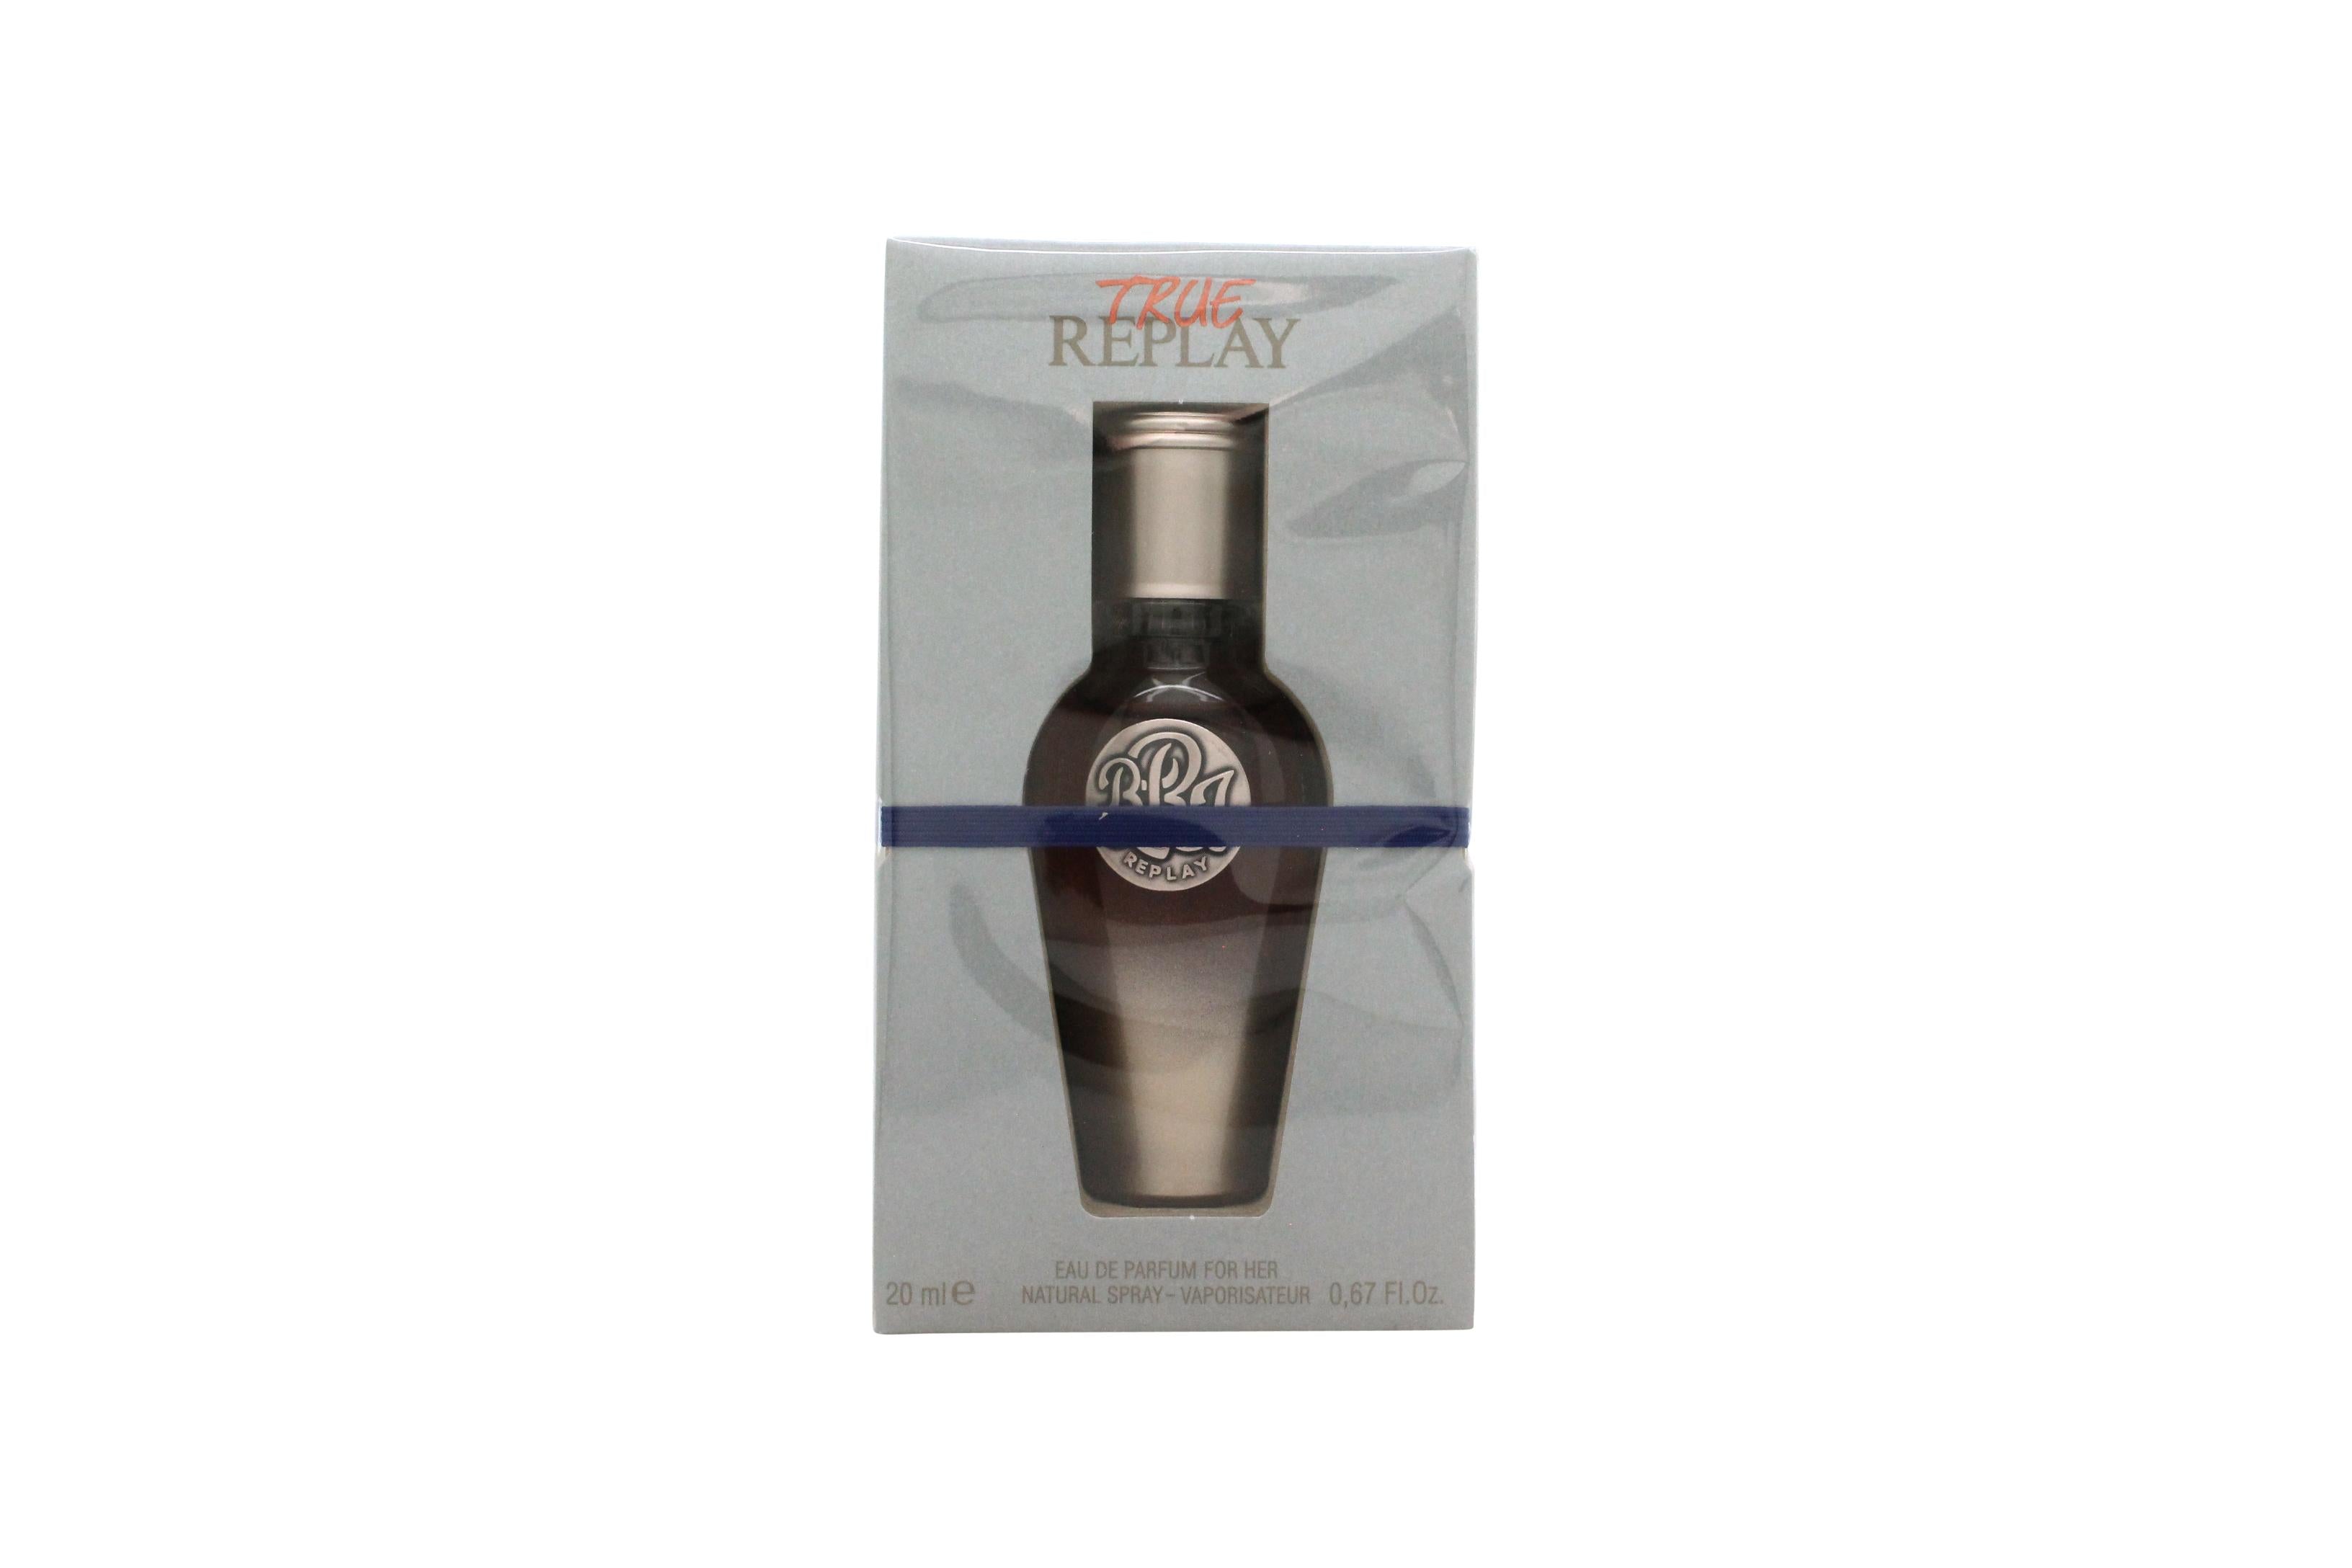 View Replay True Replay For Her Eau de Toilette 20ml information